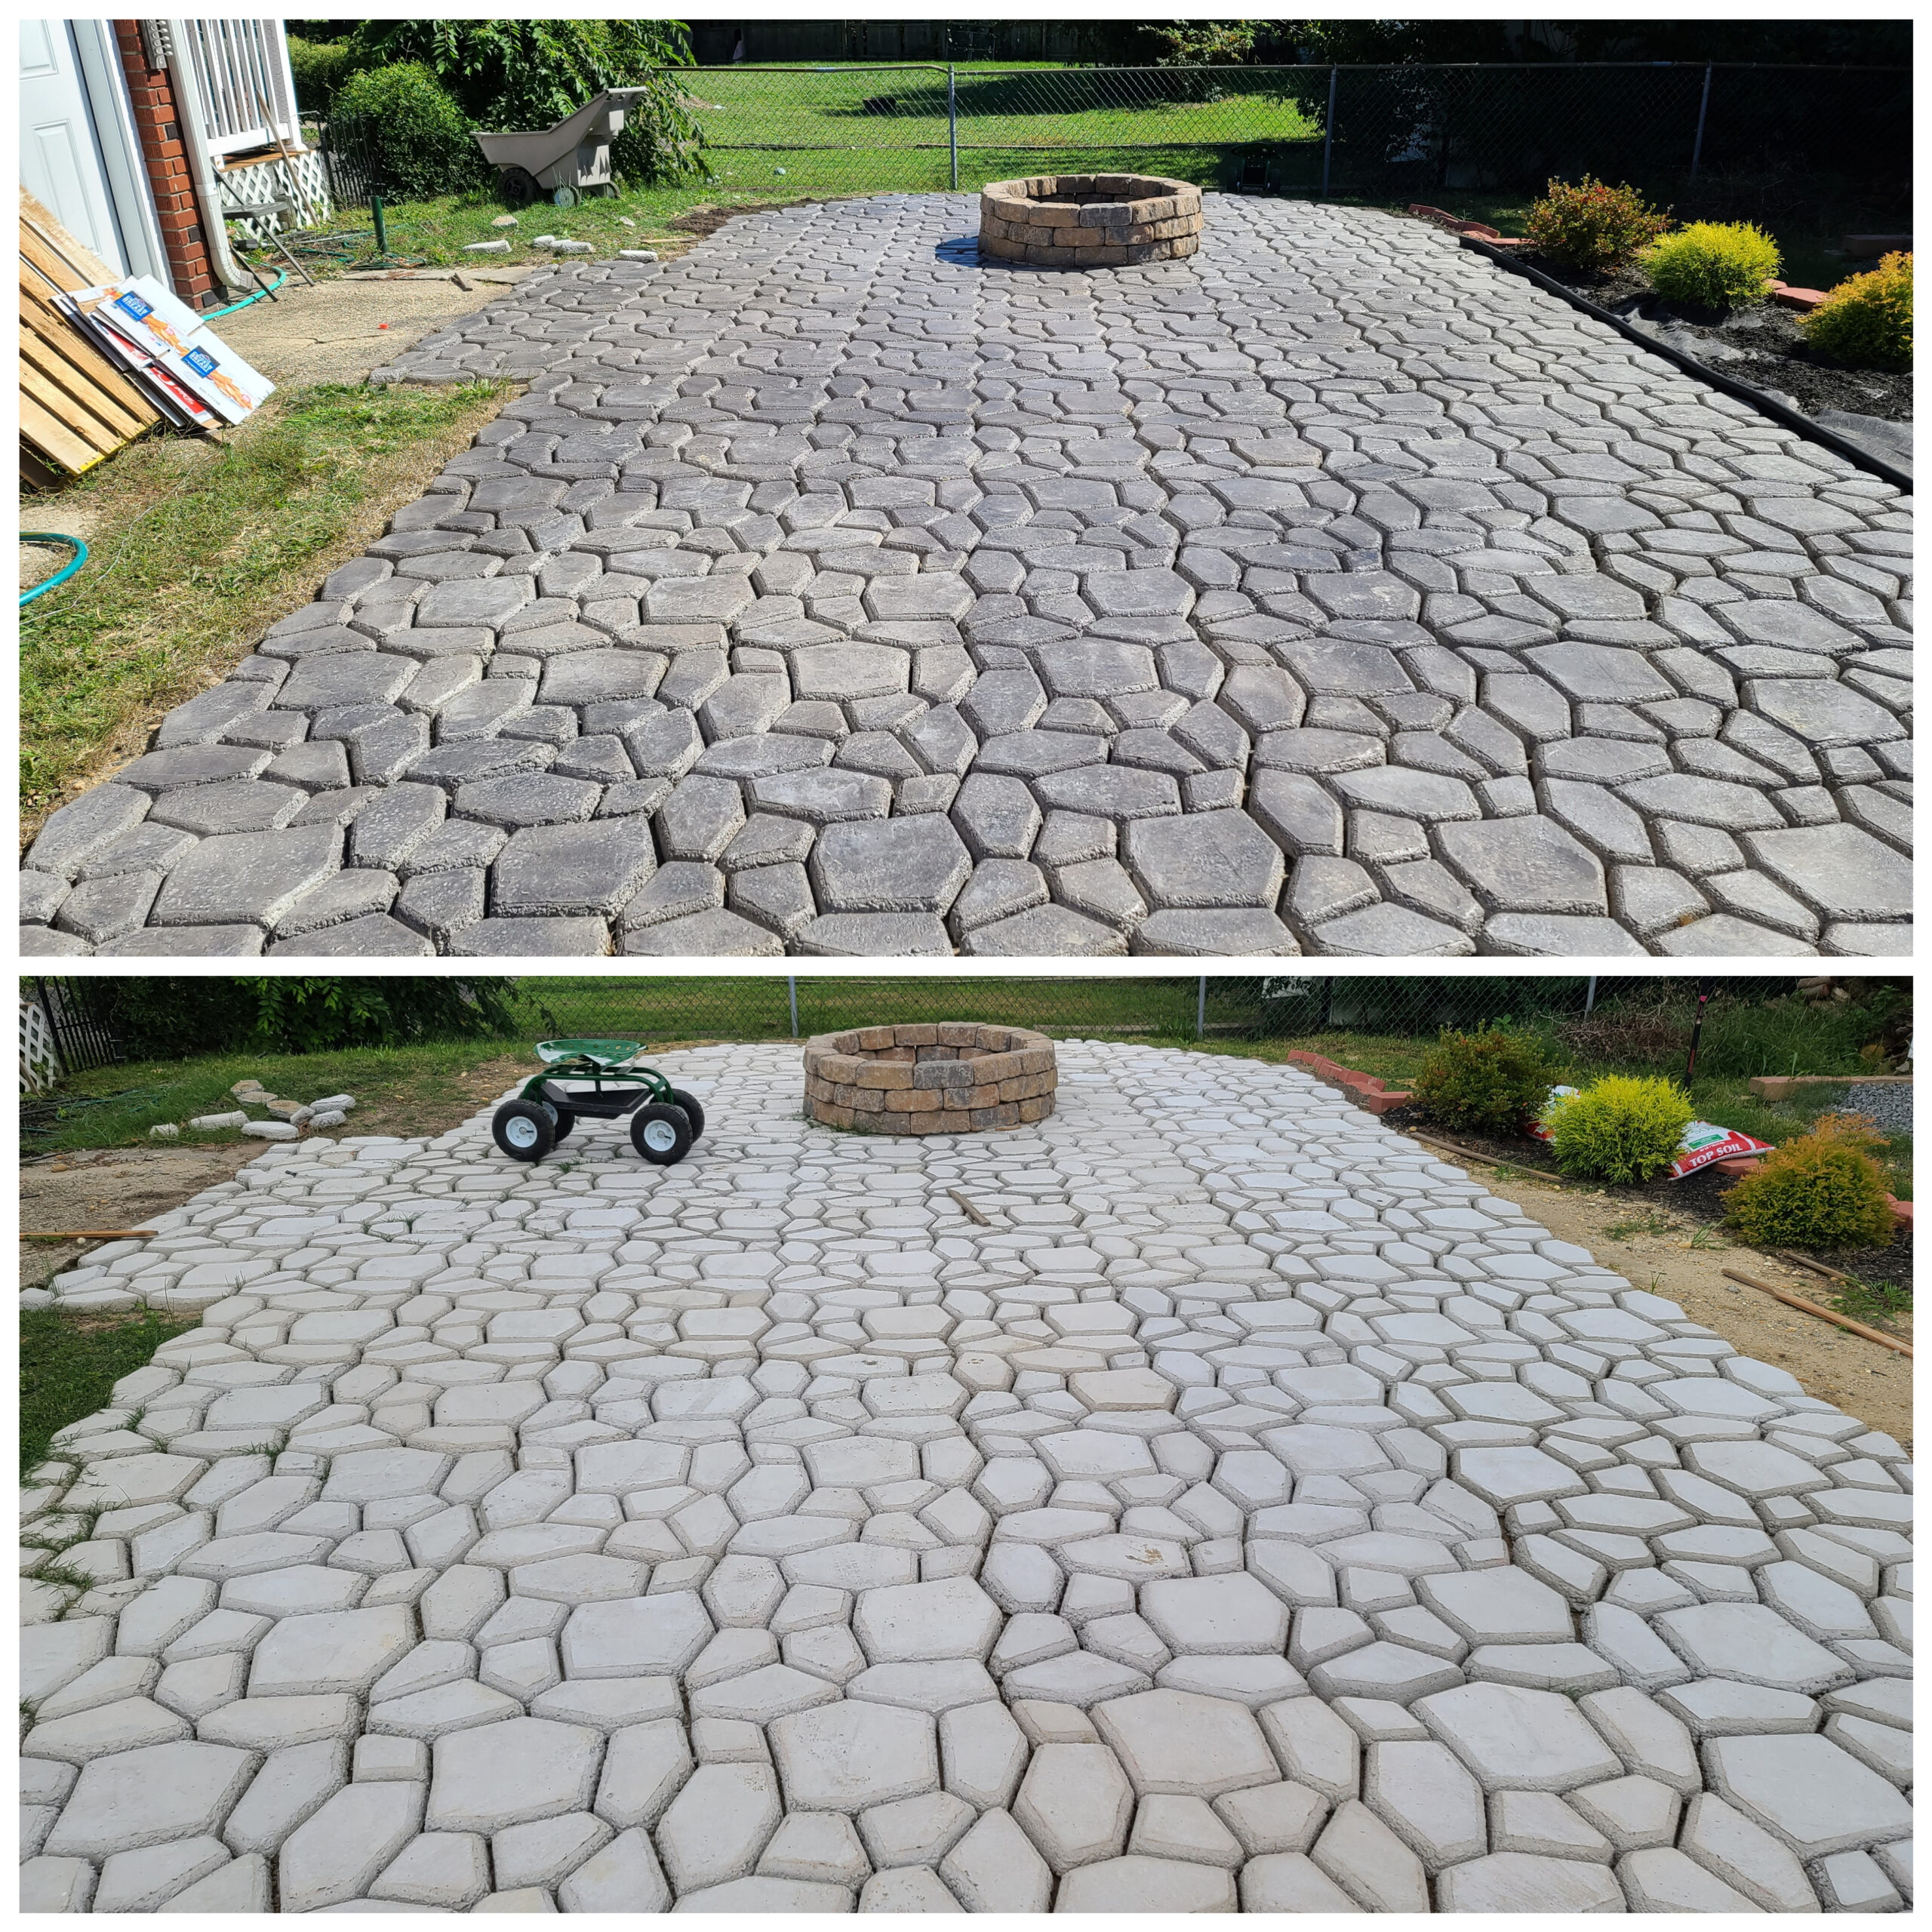 Light Charcoal Stained Patio Pavers Made with Quikrete Country Stone Walk Maker Mold - Photo